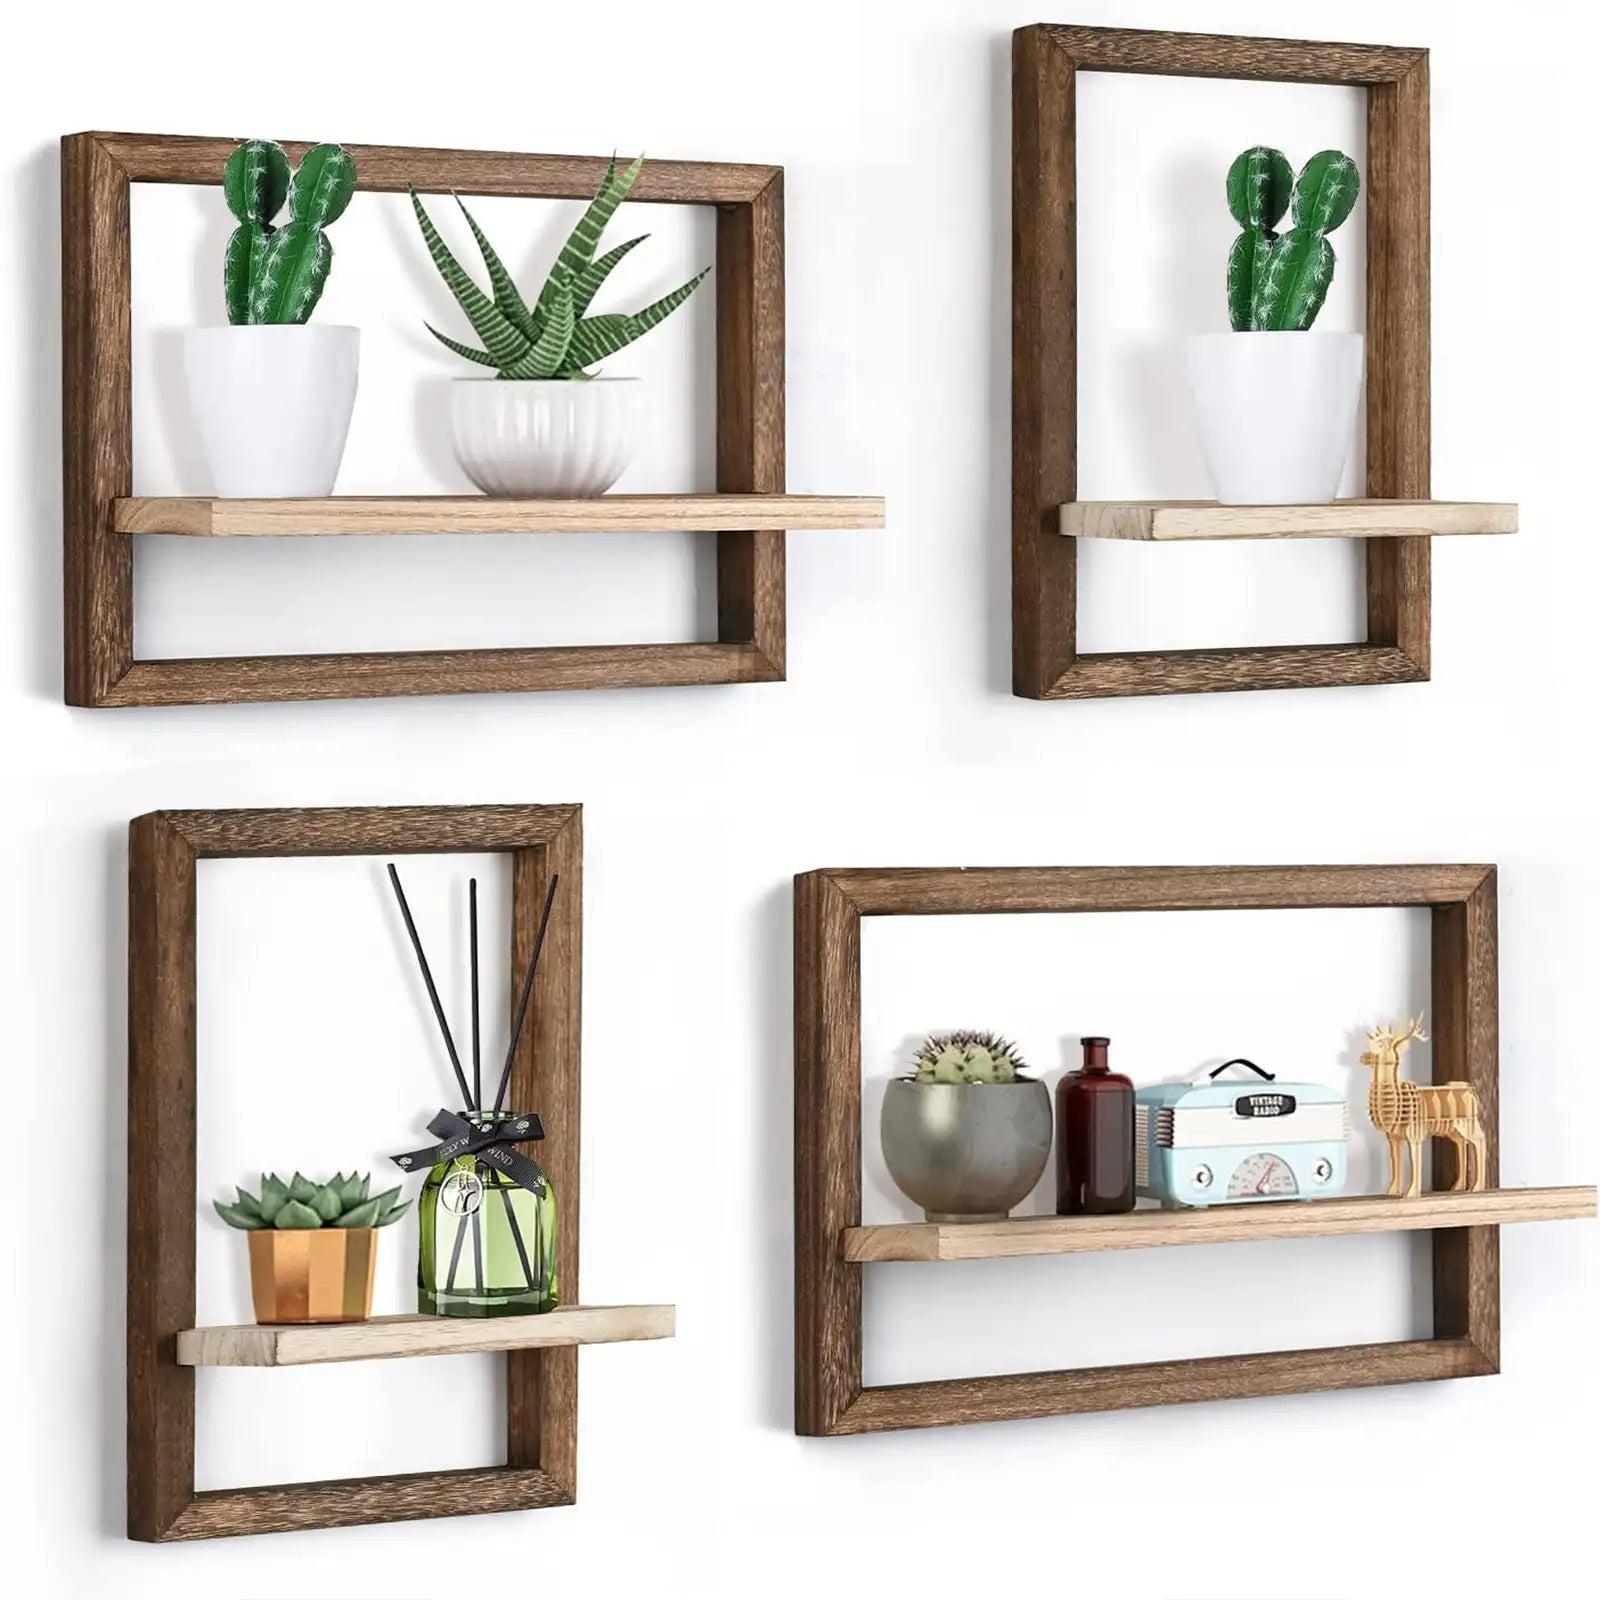 Floating Shelves for Wall, Rustic Square Floating Shelves Set of 4 Wood Wall Shelves, Hanging Shelves for Wall Decor, Wall Mounted Shelves for Bathroom, Living Room, Kitchen Storage